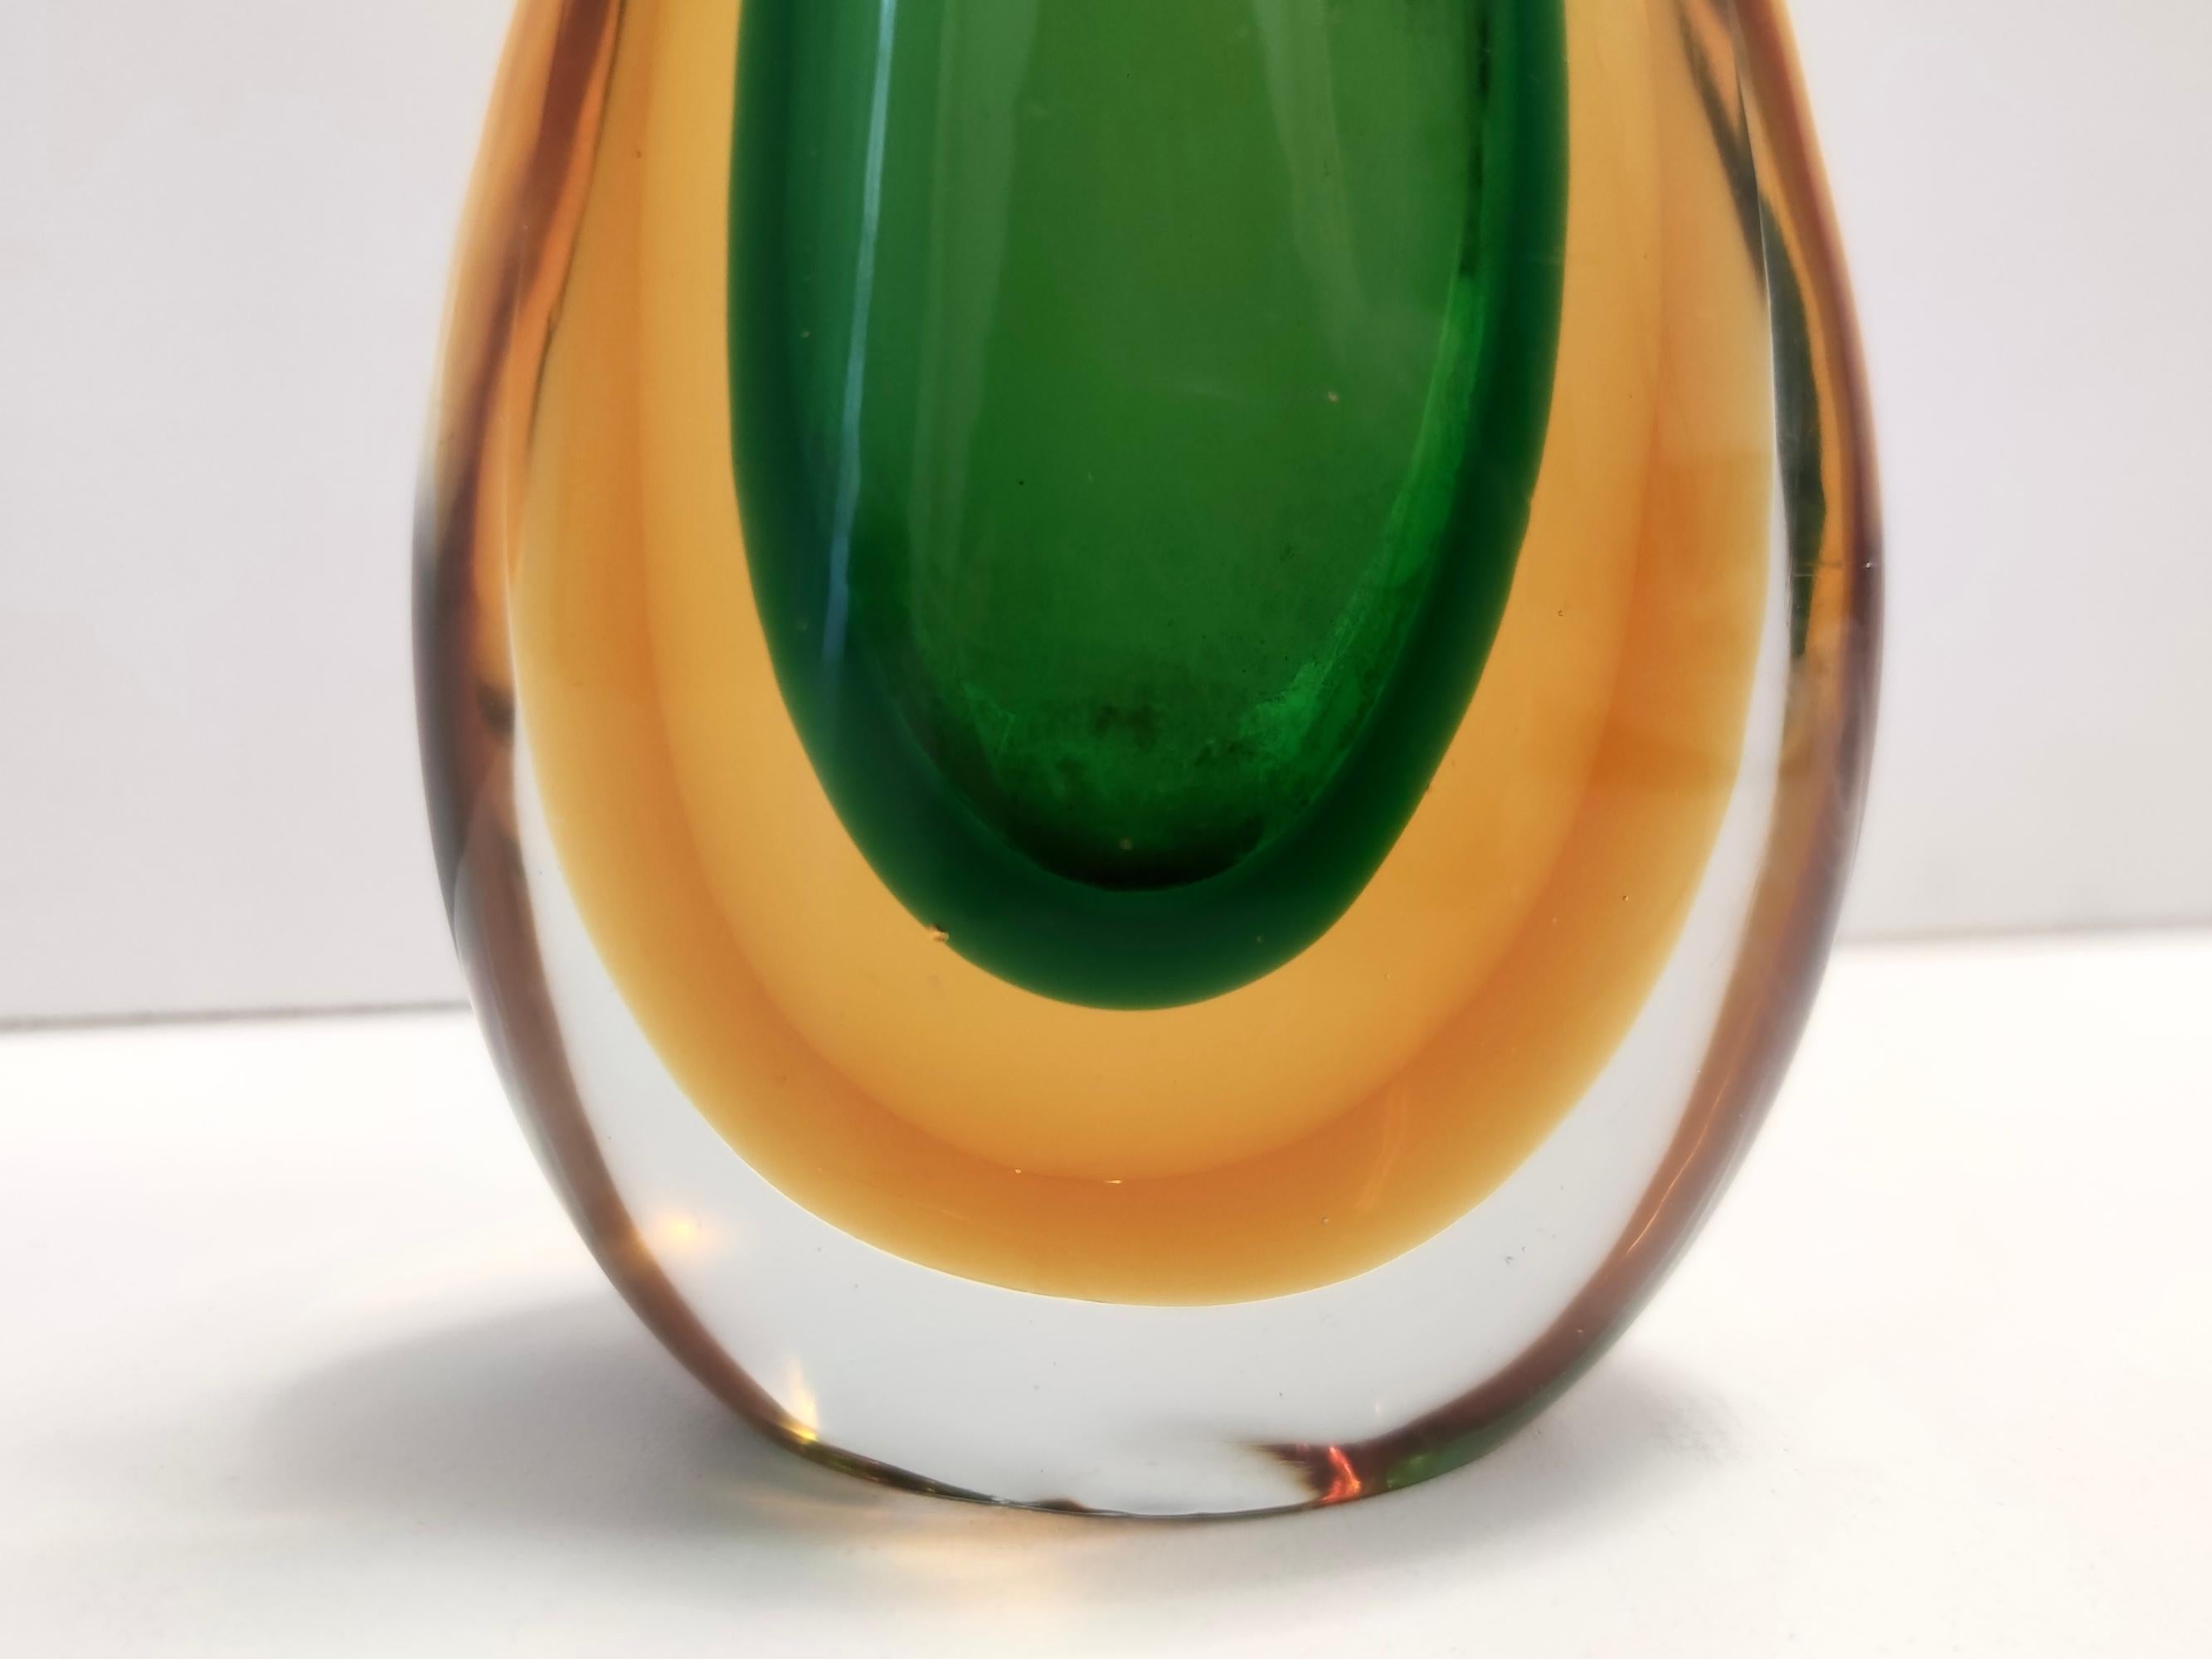 Vintage Green and Orange Sommerso Murano Glass Vase by Flavio Poli, Italy For Sale 3